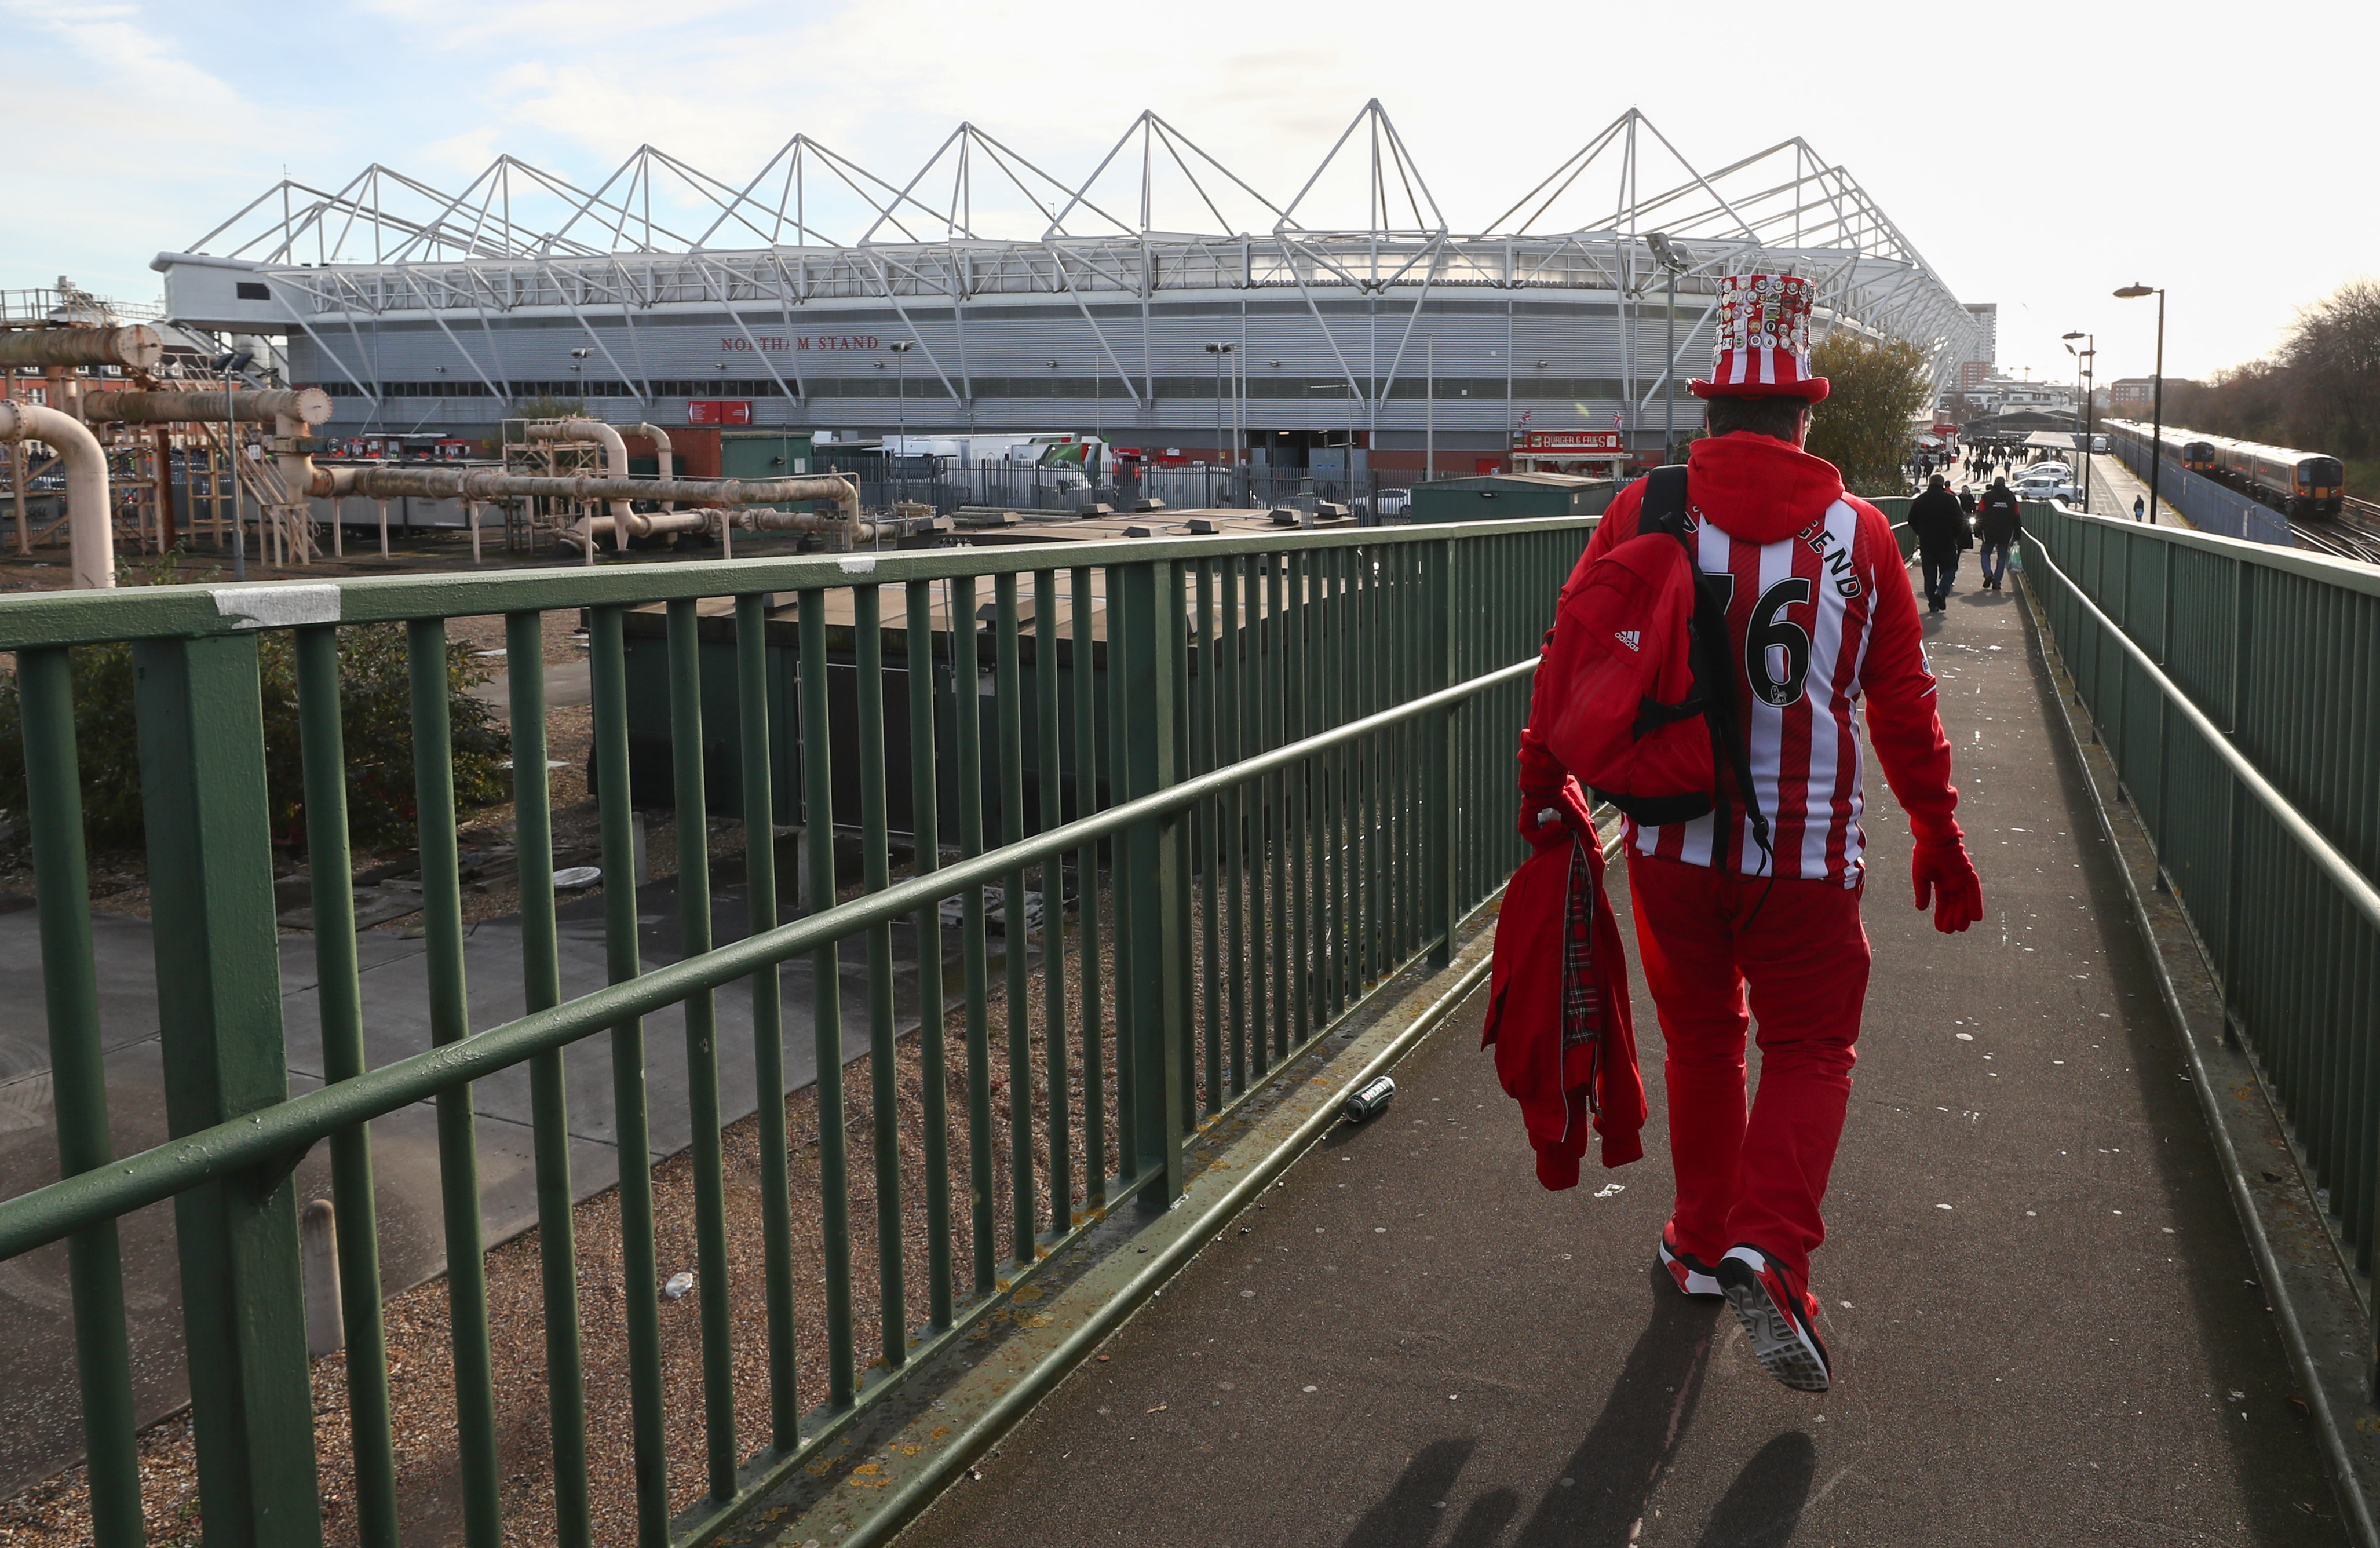 SOUTHAMPTON, ENGLAND - NOVEMBER 26: A Southampton fan makes his way to the stadium before the Premier League match between Southampton and Everton at St Mary's Stadium on November 26, 2017 in Southampton, England. (Photo by Catherine Ivill/Getty Images)